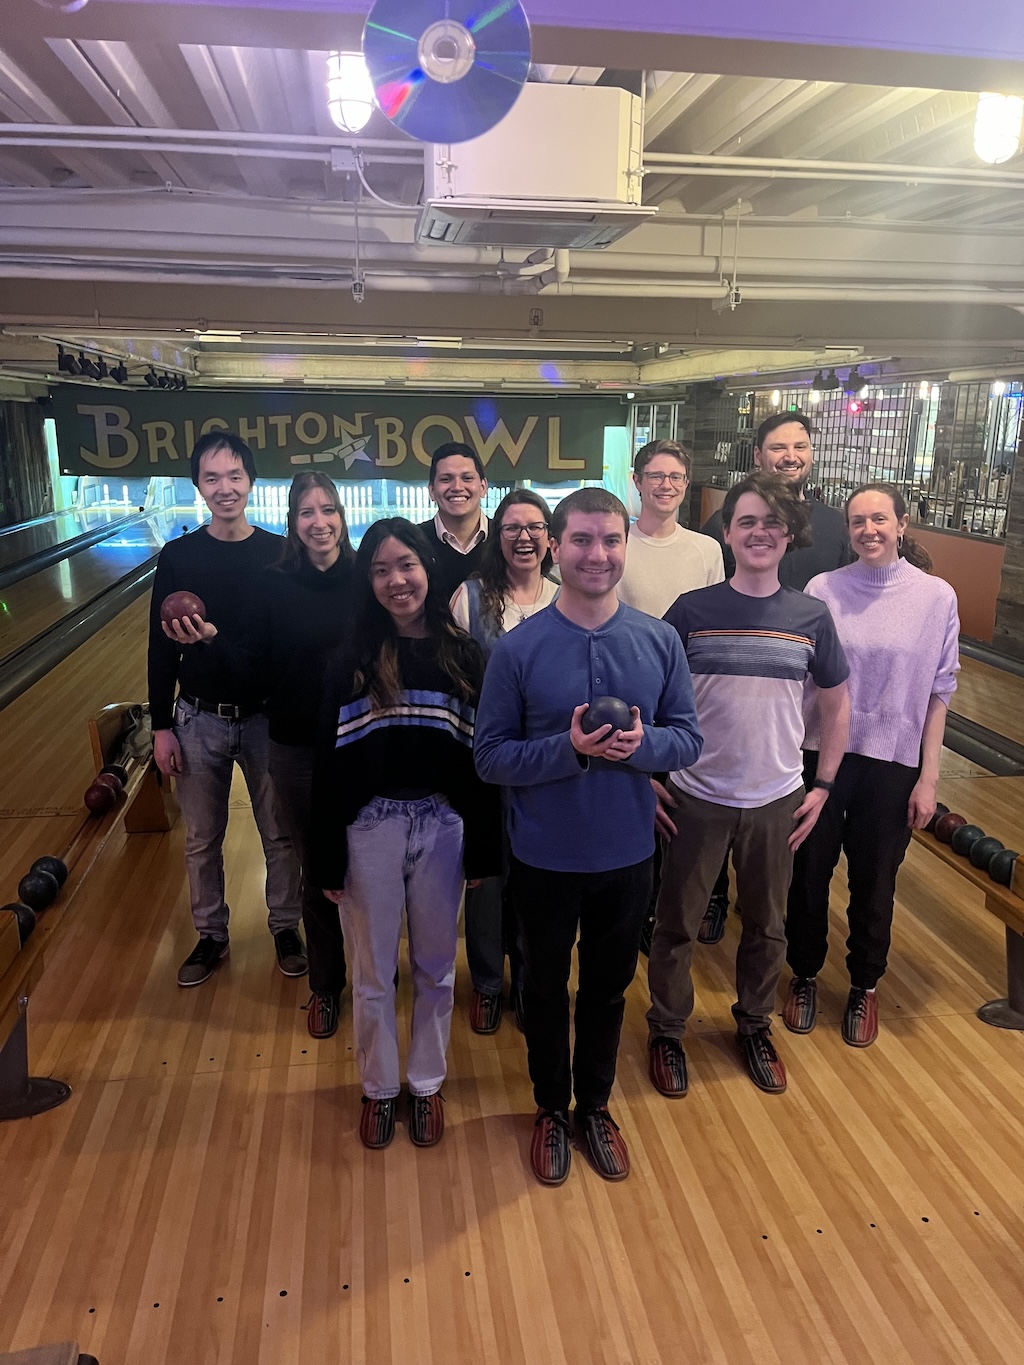 Ten lab members arranged like bowling pins taking a picture at a candlepin bowling alley.